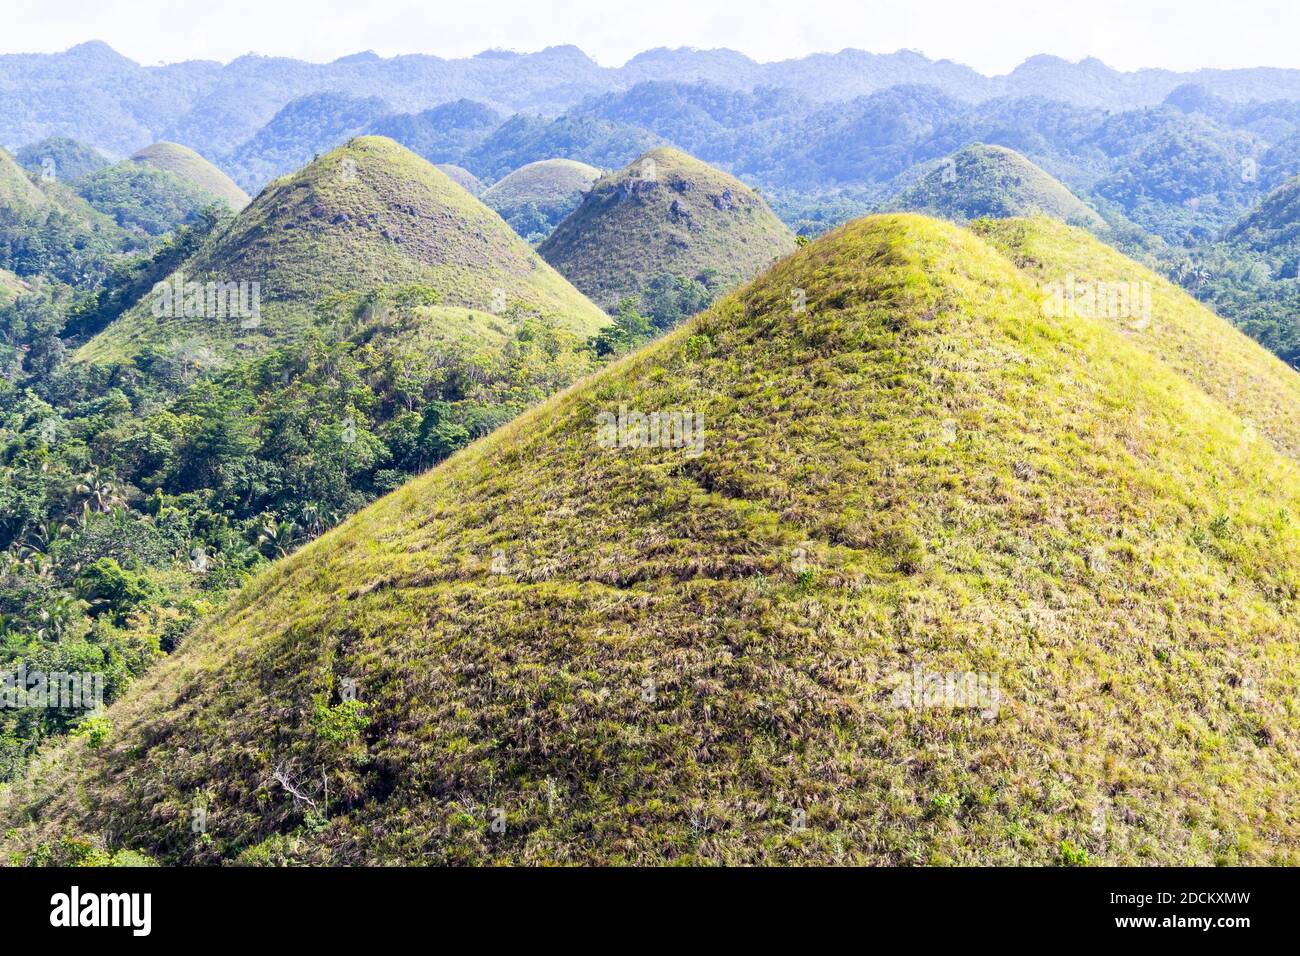 The chocolate hills of Bohol in the Philippines Stock Photo